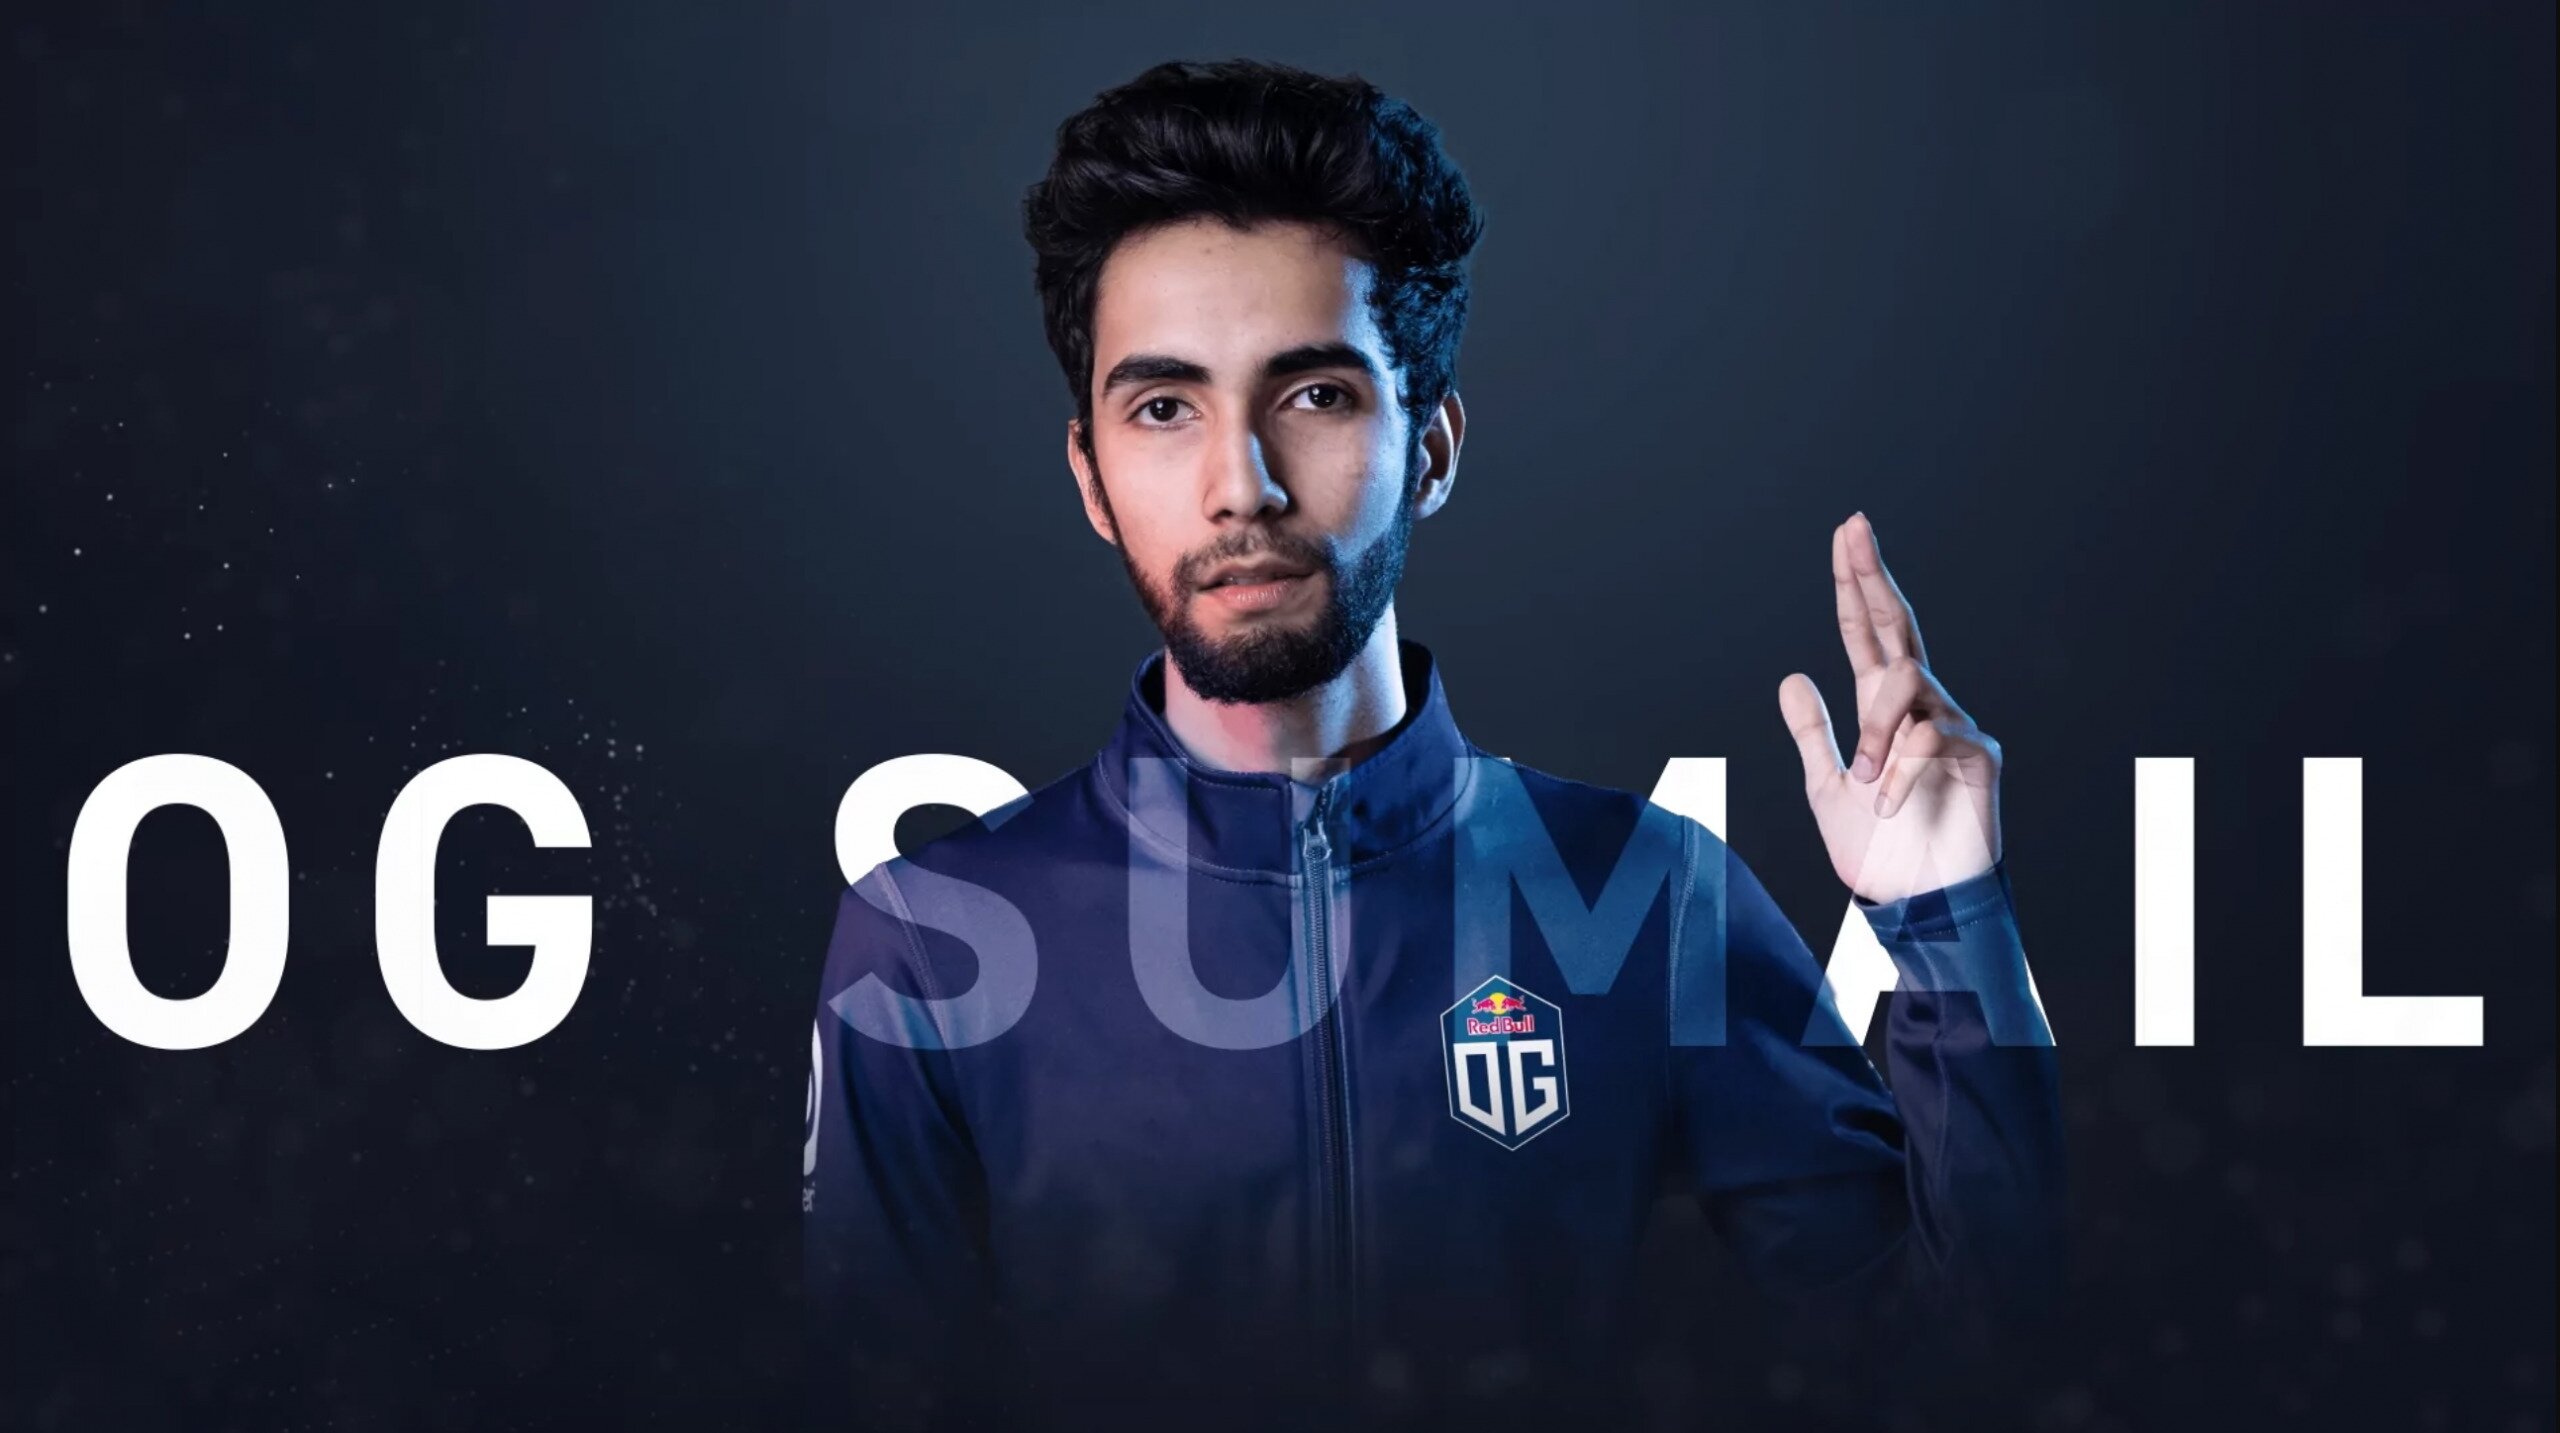 The King has Returned! Sumail is the next piece in the puzzle that is OG (Image via OG)